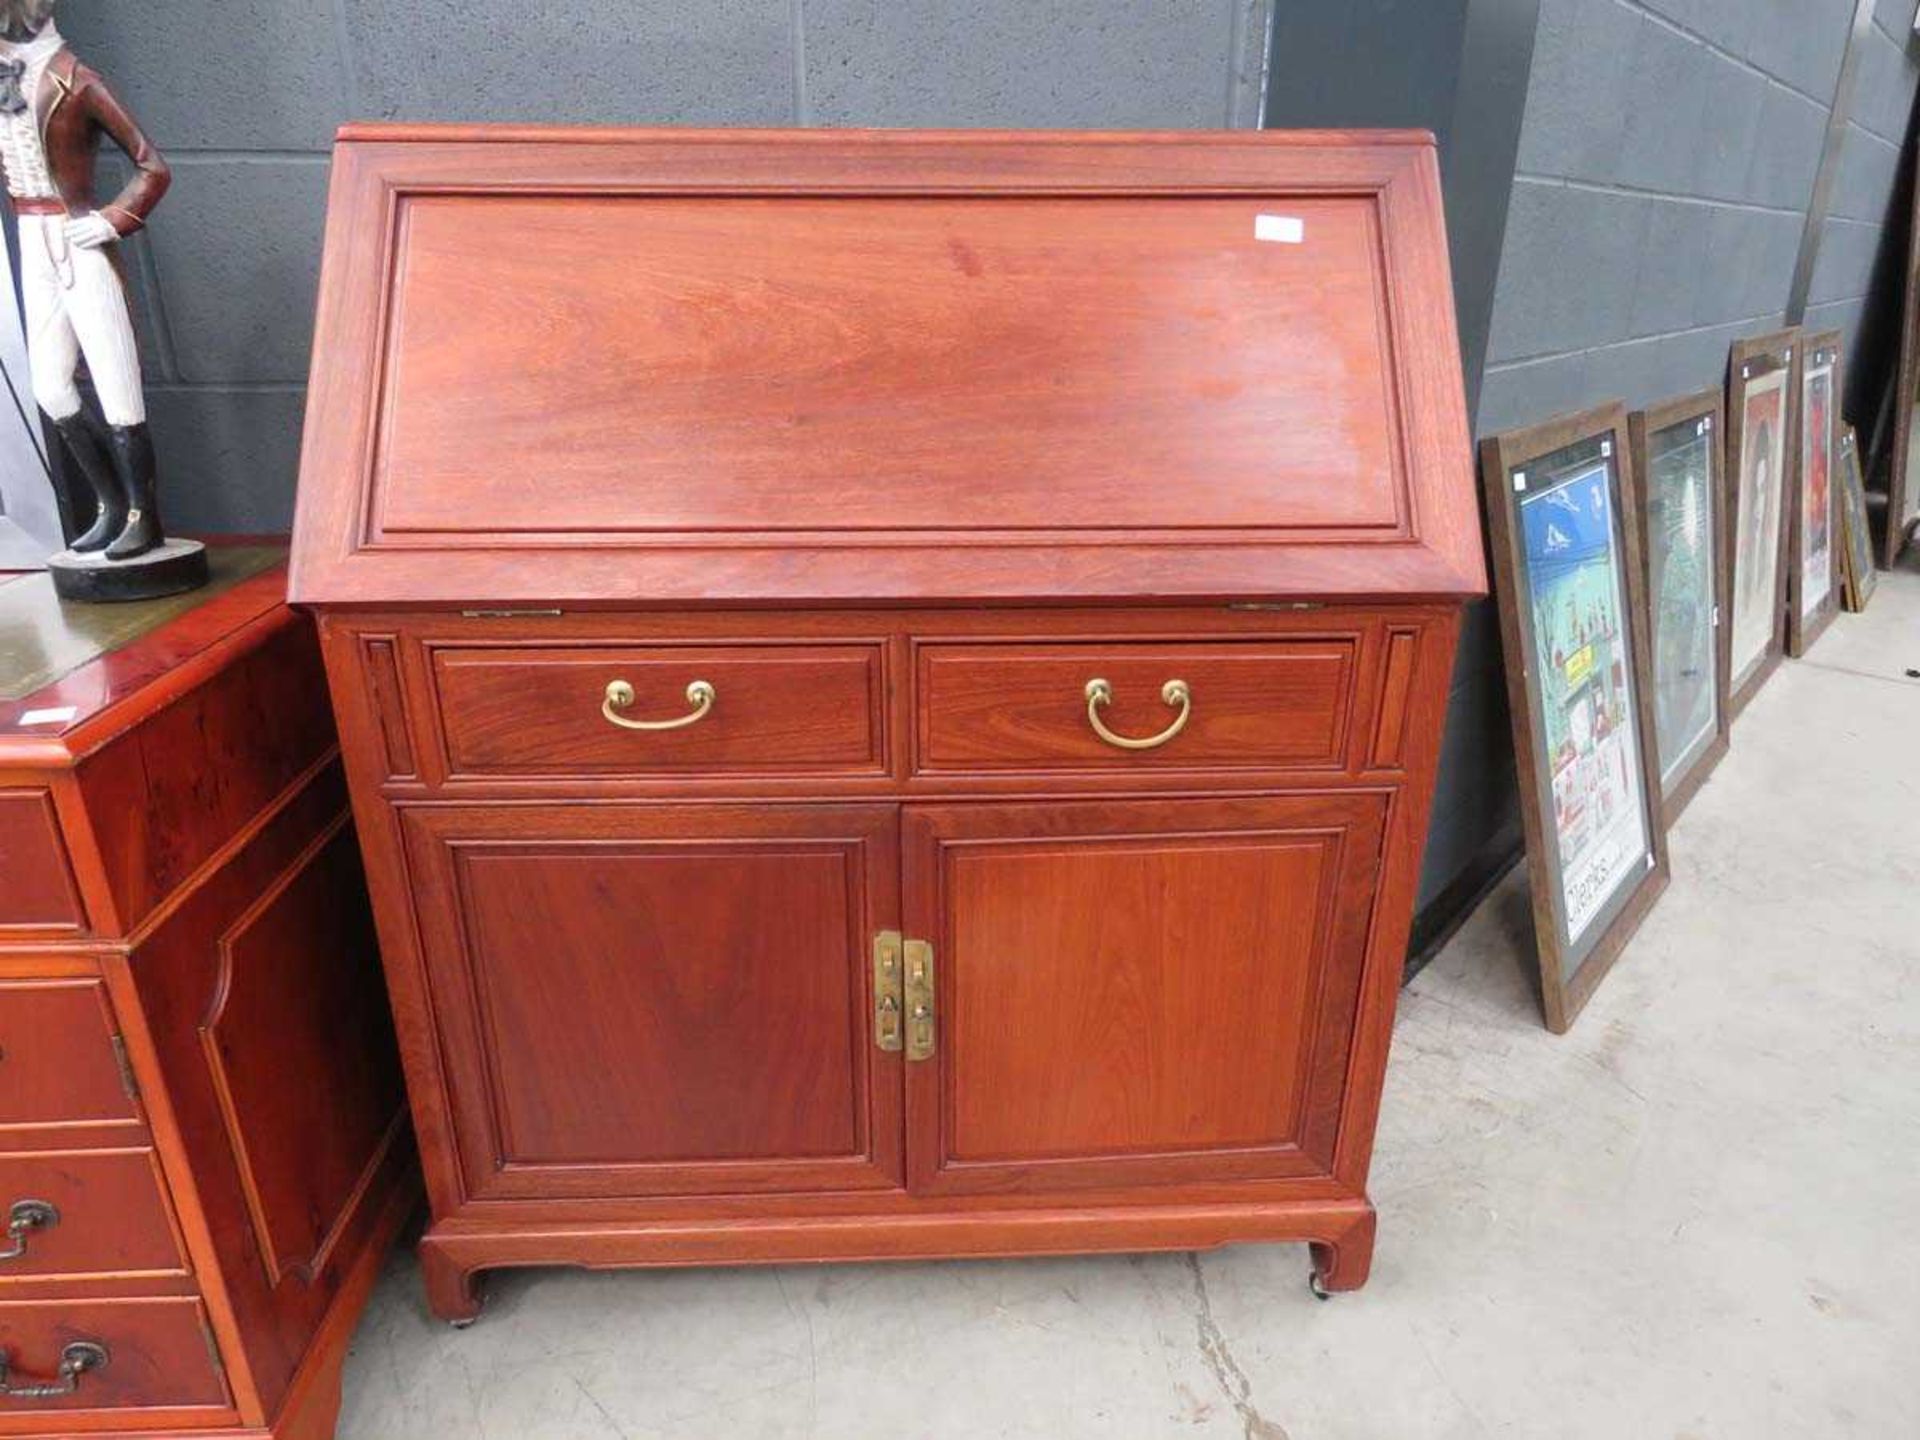 Teak bureau with two drawers and cupboard under